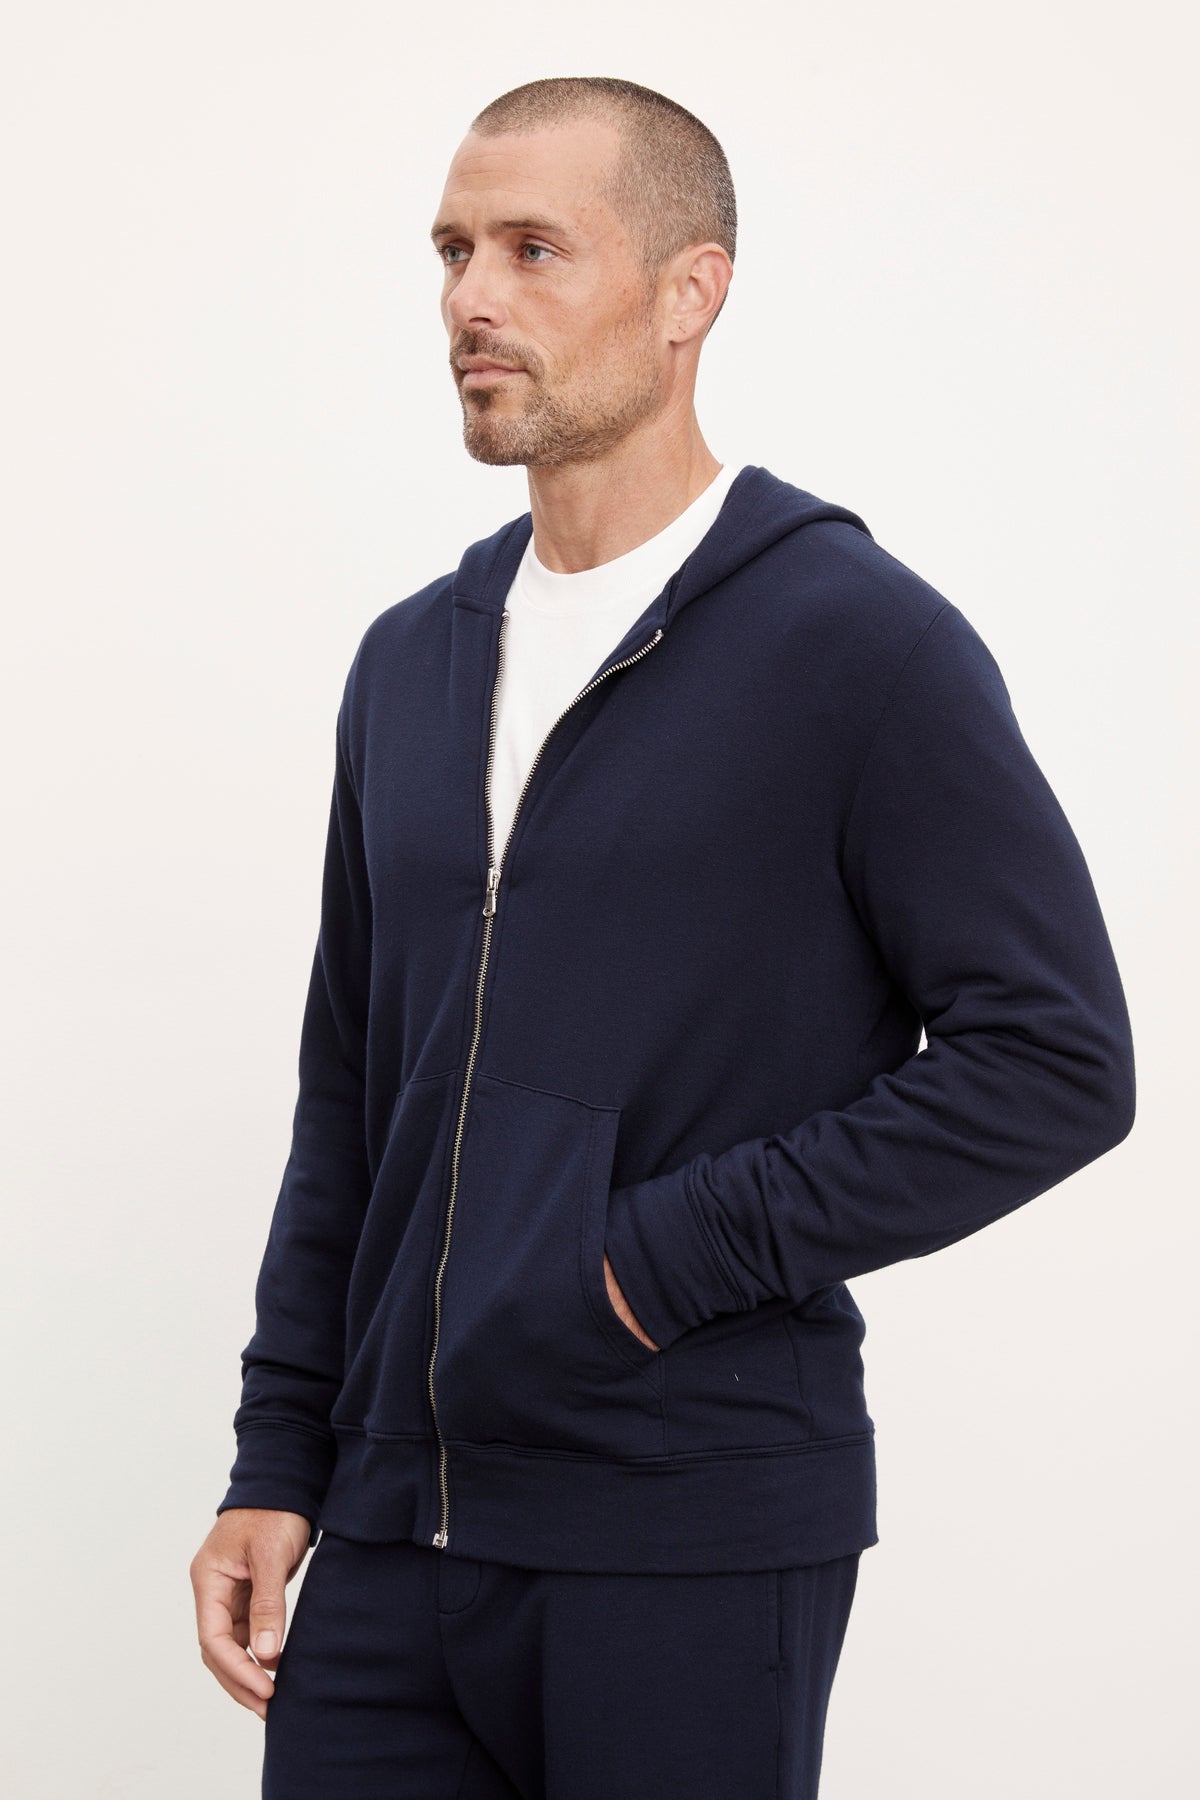 A man in a navy blue non-bulky fit RODAN LUXE FLEECE ZIP HOODIE and matching pants, standing with his hand on his hip, looking to his left by Velvet by Graham & Spencer.-36731041349825